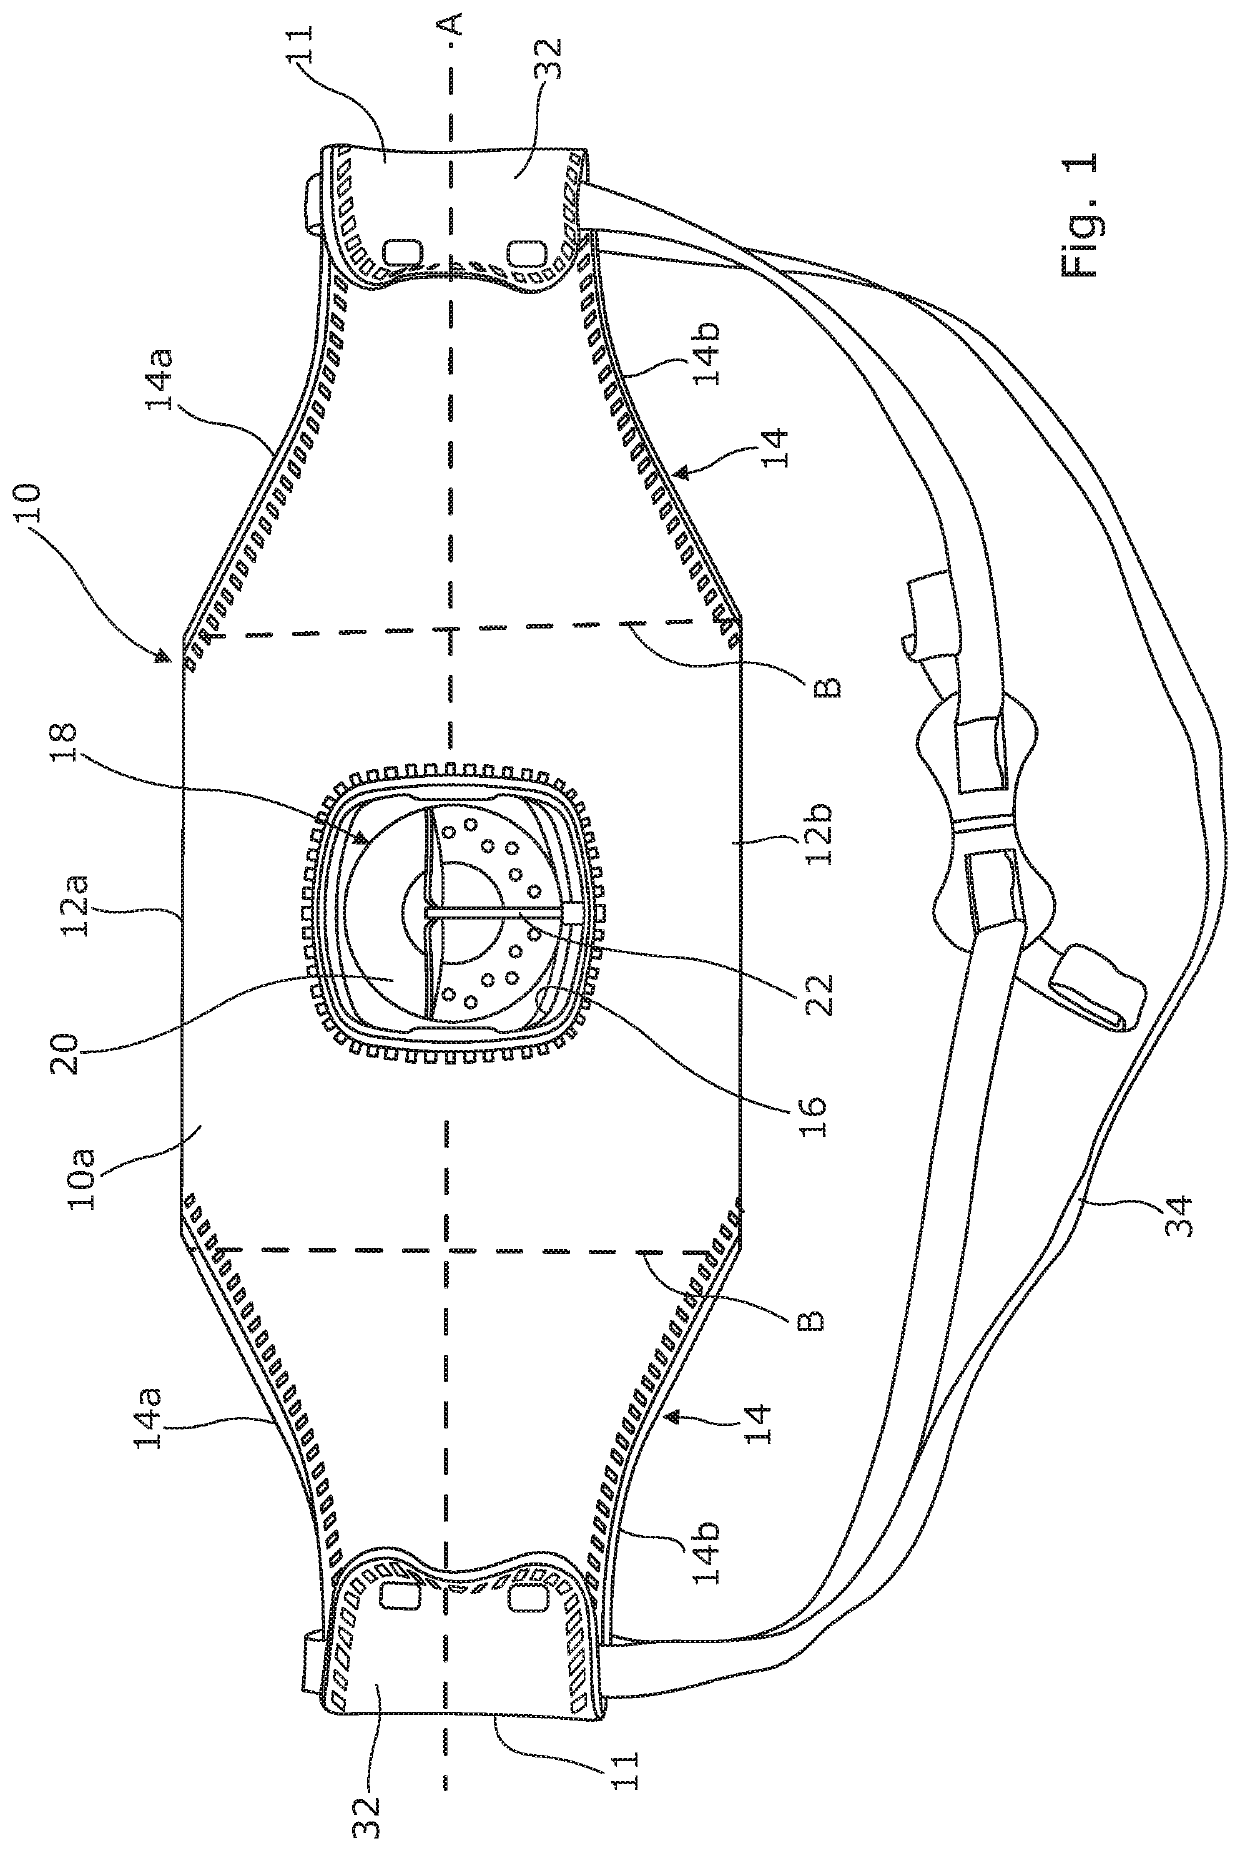 Personal respiratory protection device and method of manufacturing a personal respiratory protection device